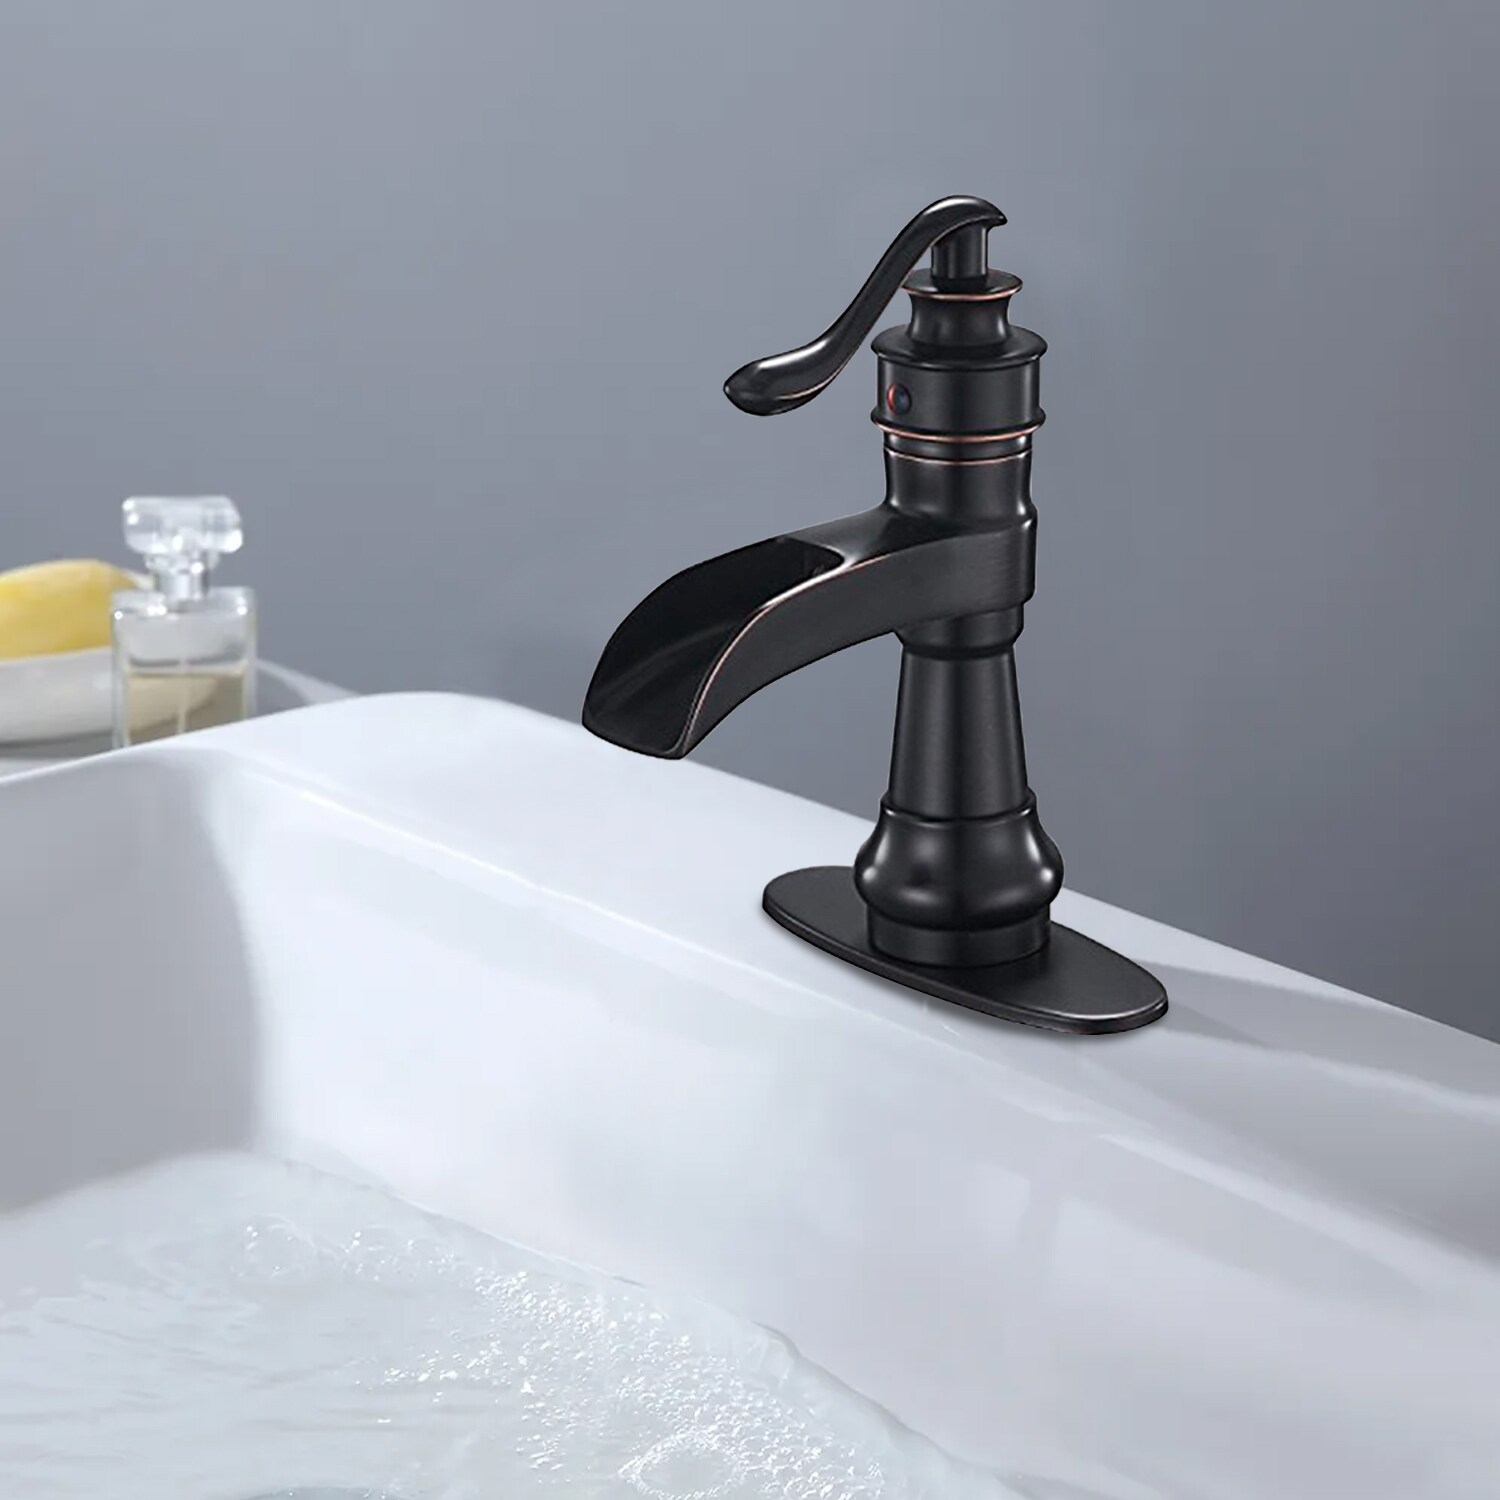 WELLFOR FOR HOME Bathroom Sink Faucets Oil Rubbed Bronze 1-handle Single Hole Waterfall Bathroom Sink Faucet with Drain with Deck Plate